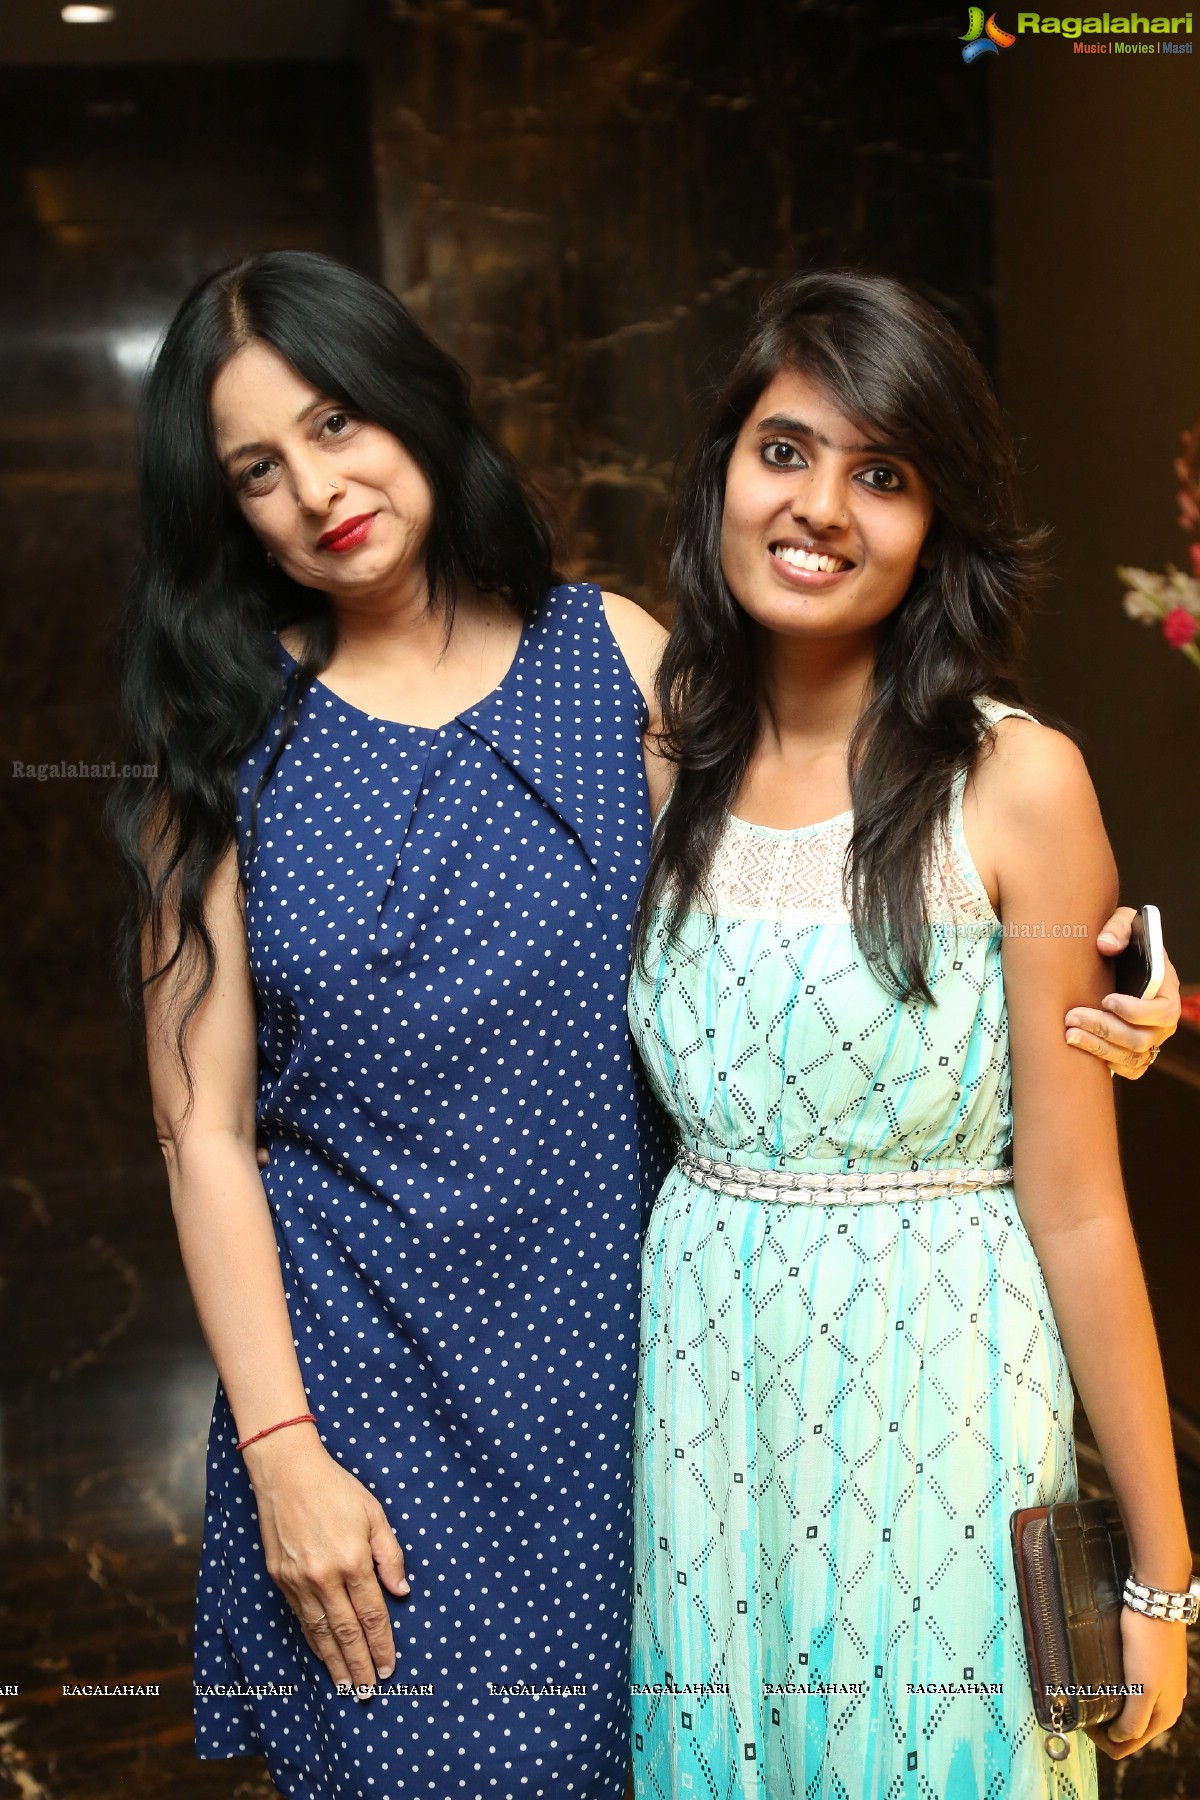 Evening of Fashion, Shopping and Cocktails at The Oak, Oakwood Residence Kapil Hyderabad